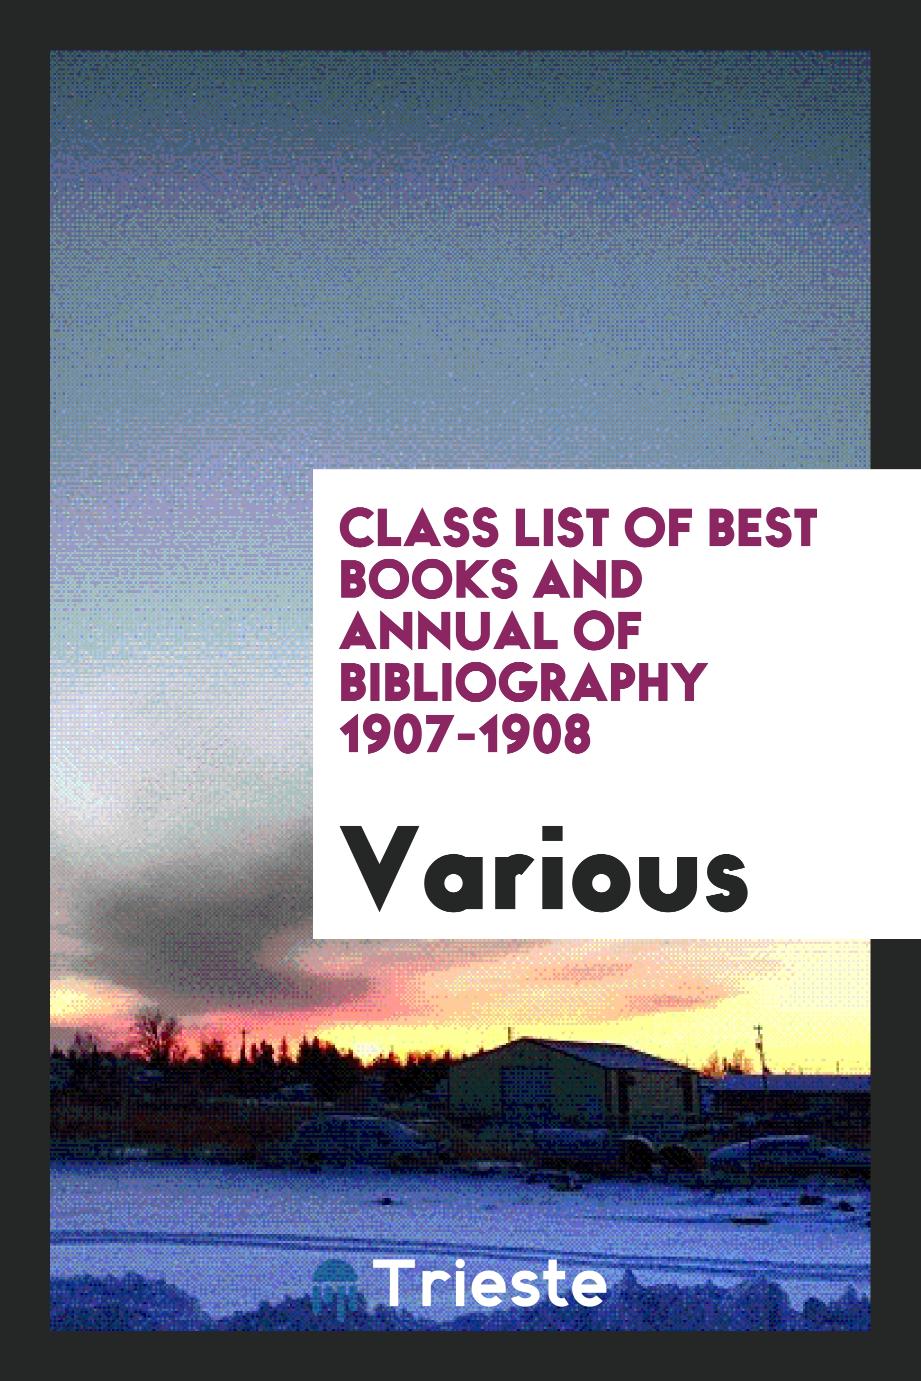 Class List of Best Books and Annual of Bibliography 1907-1908